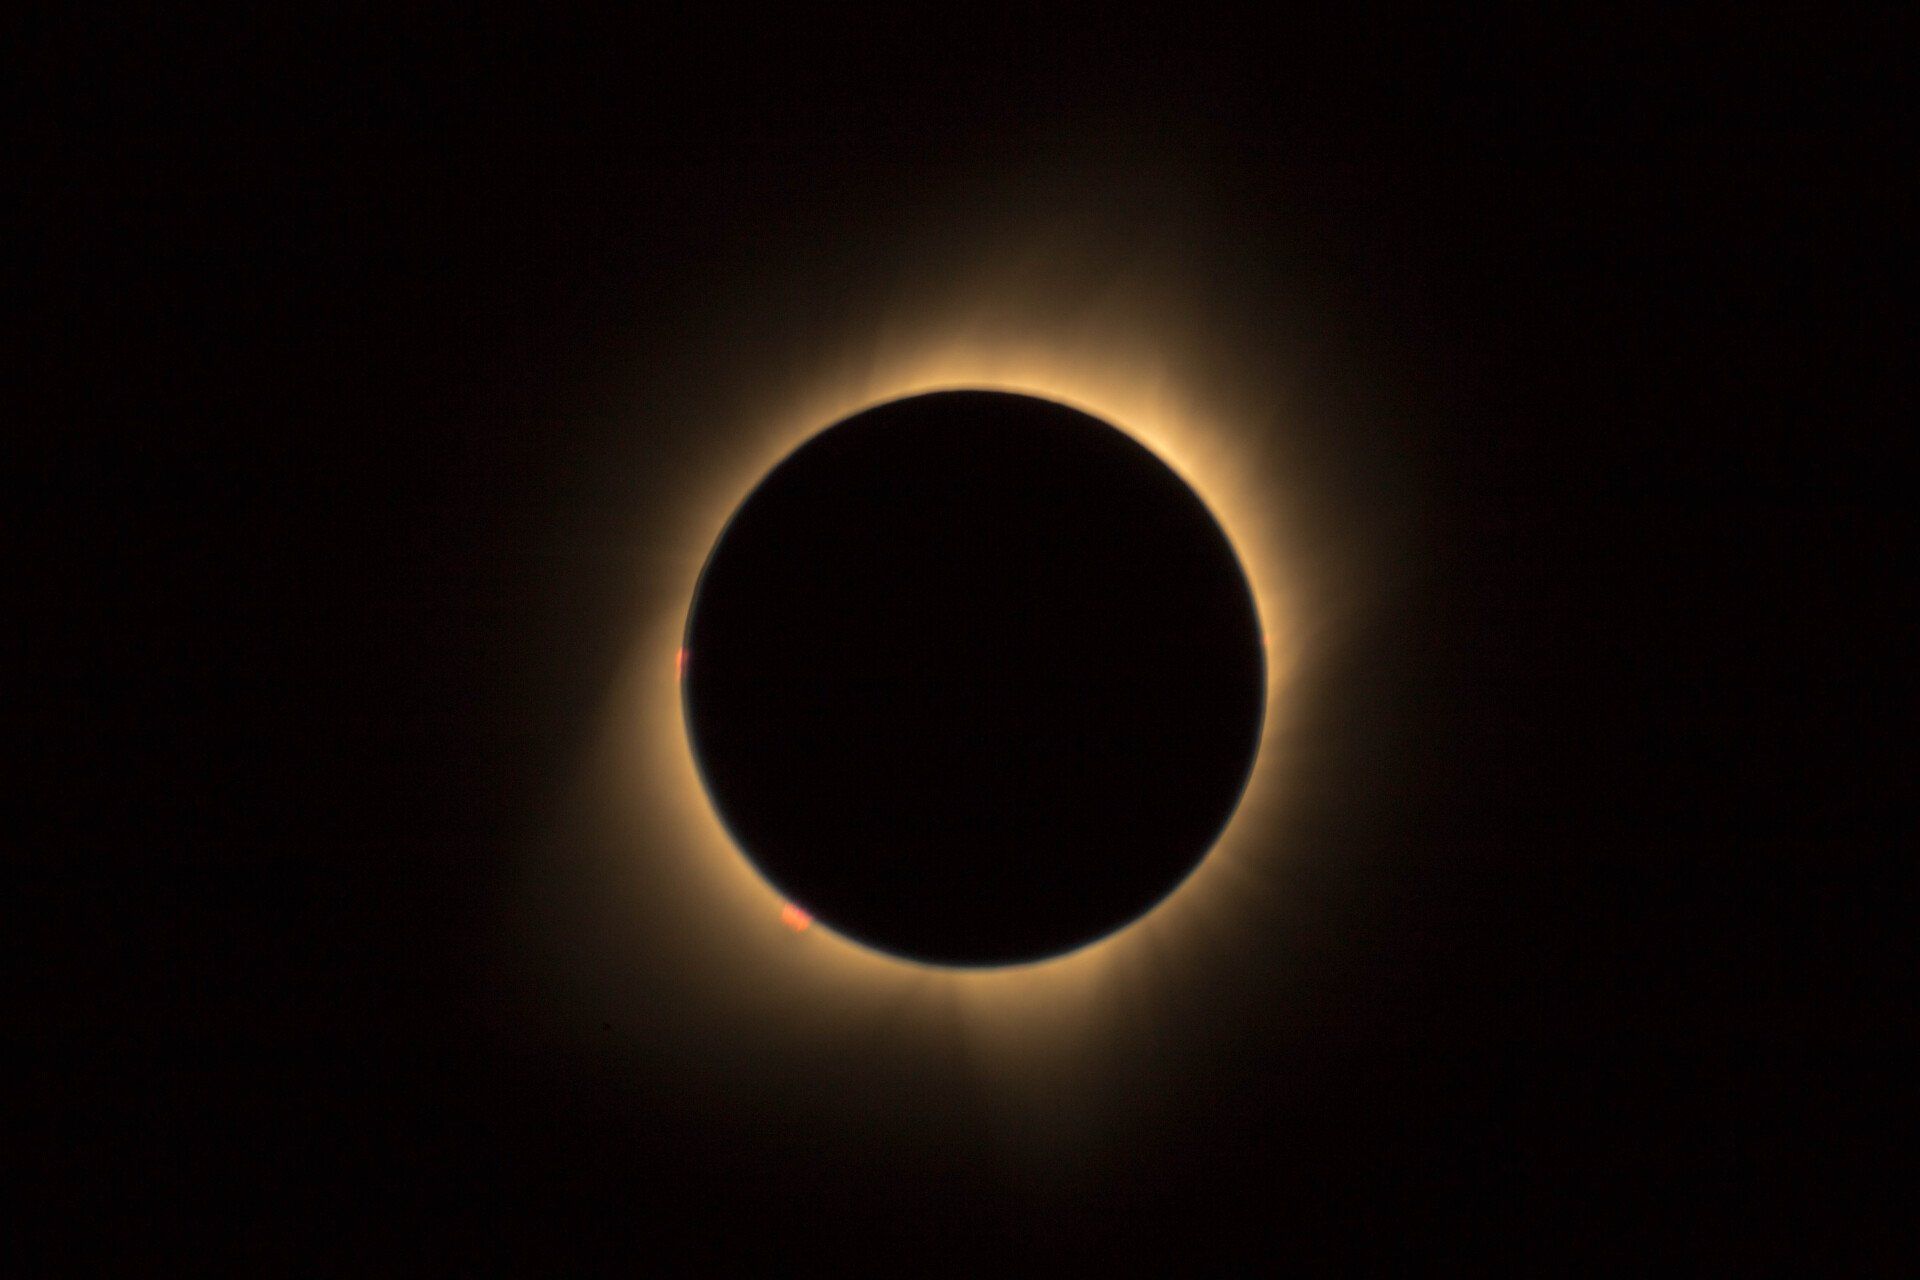 the moon is covering the sun during a total eclipse .